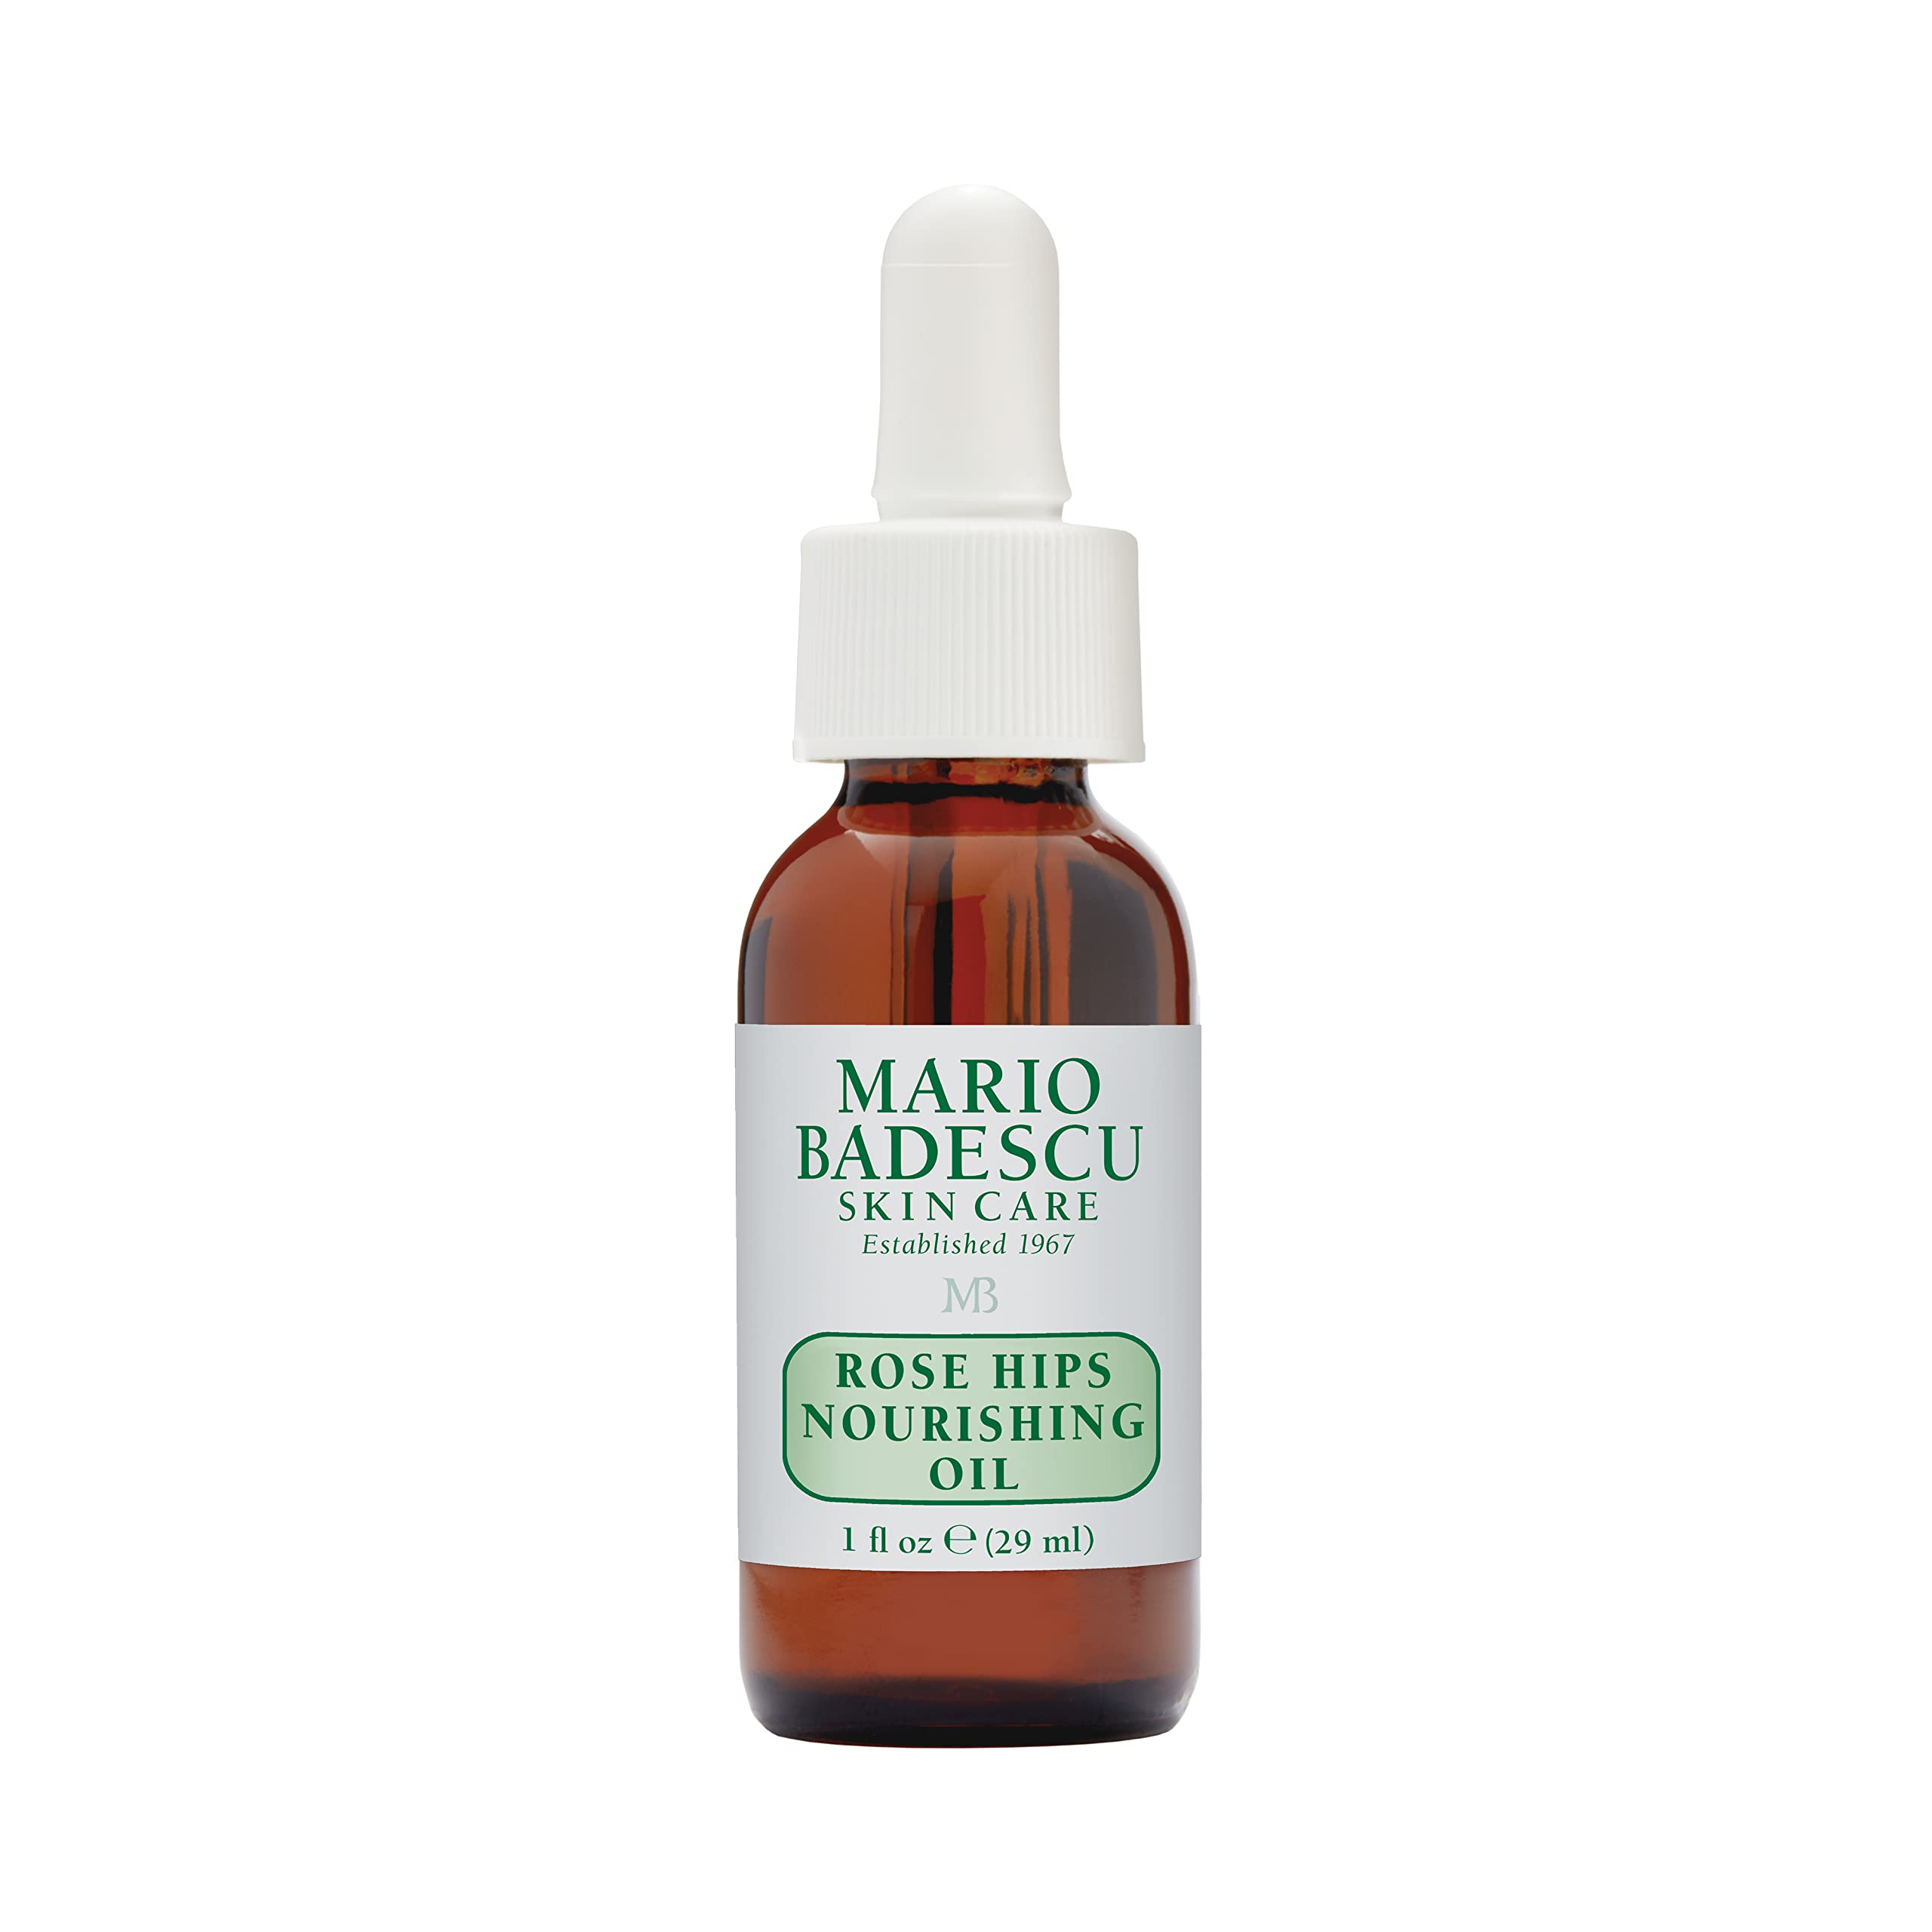 Mario Badescu Rose Hips Nourishing Oil for Combination, Dry and Sensitive Skin | Facial Oil that Moisturizes & Smoothes | Formulated with Rosehip Extract & Castor Oil| 1 FL OZ (Pack of 1)